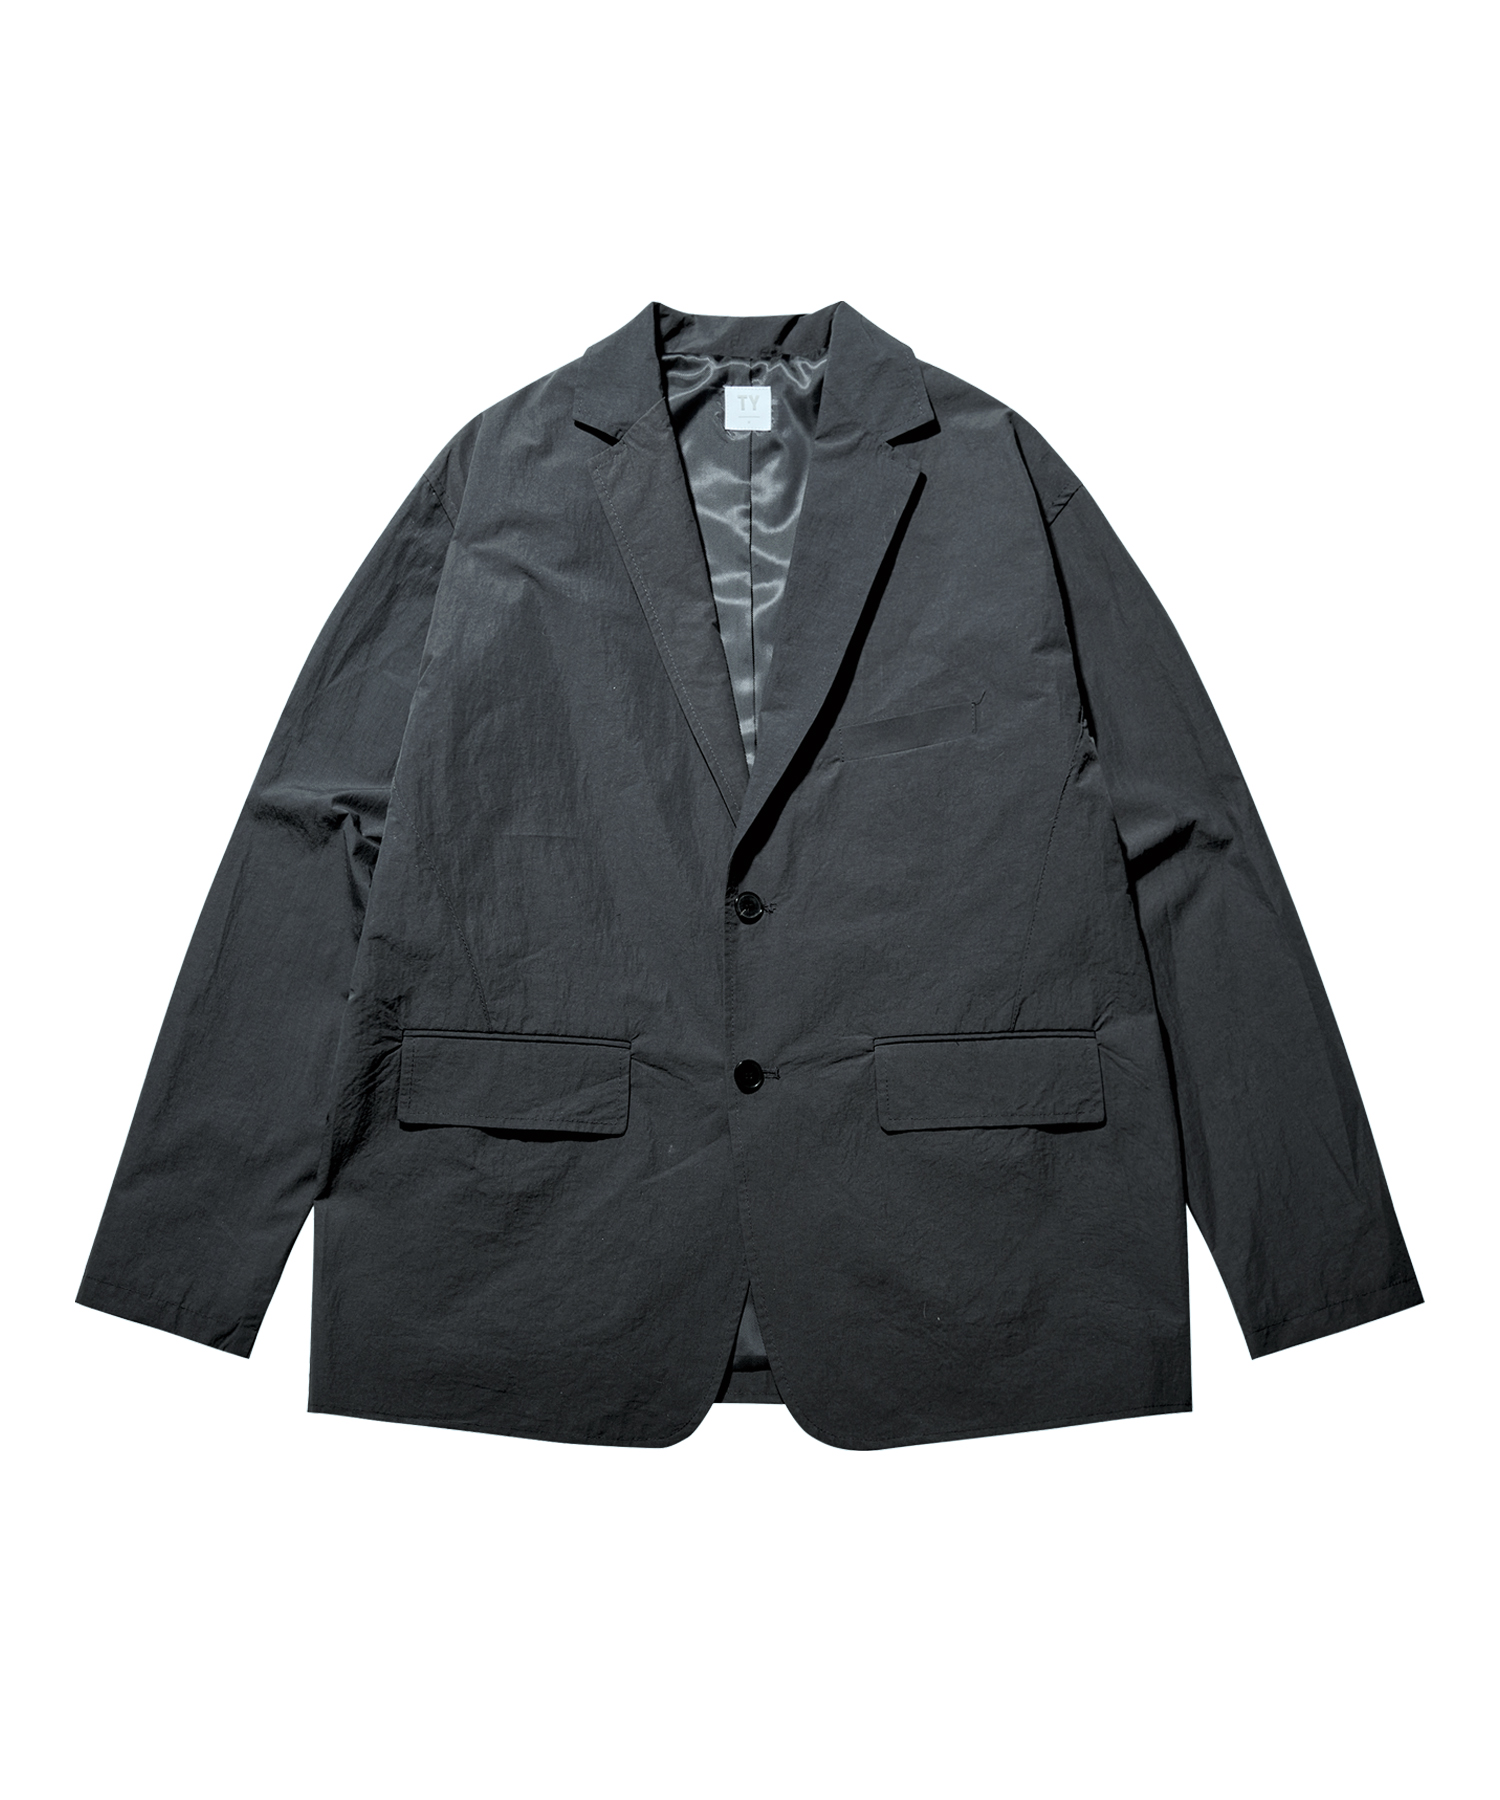 Office casual sports two button jacket_Charcoal